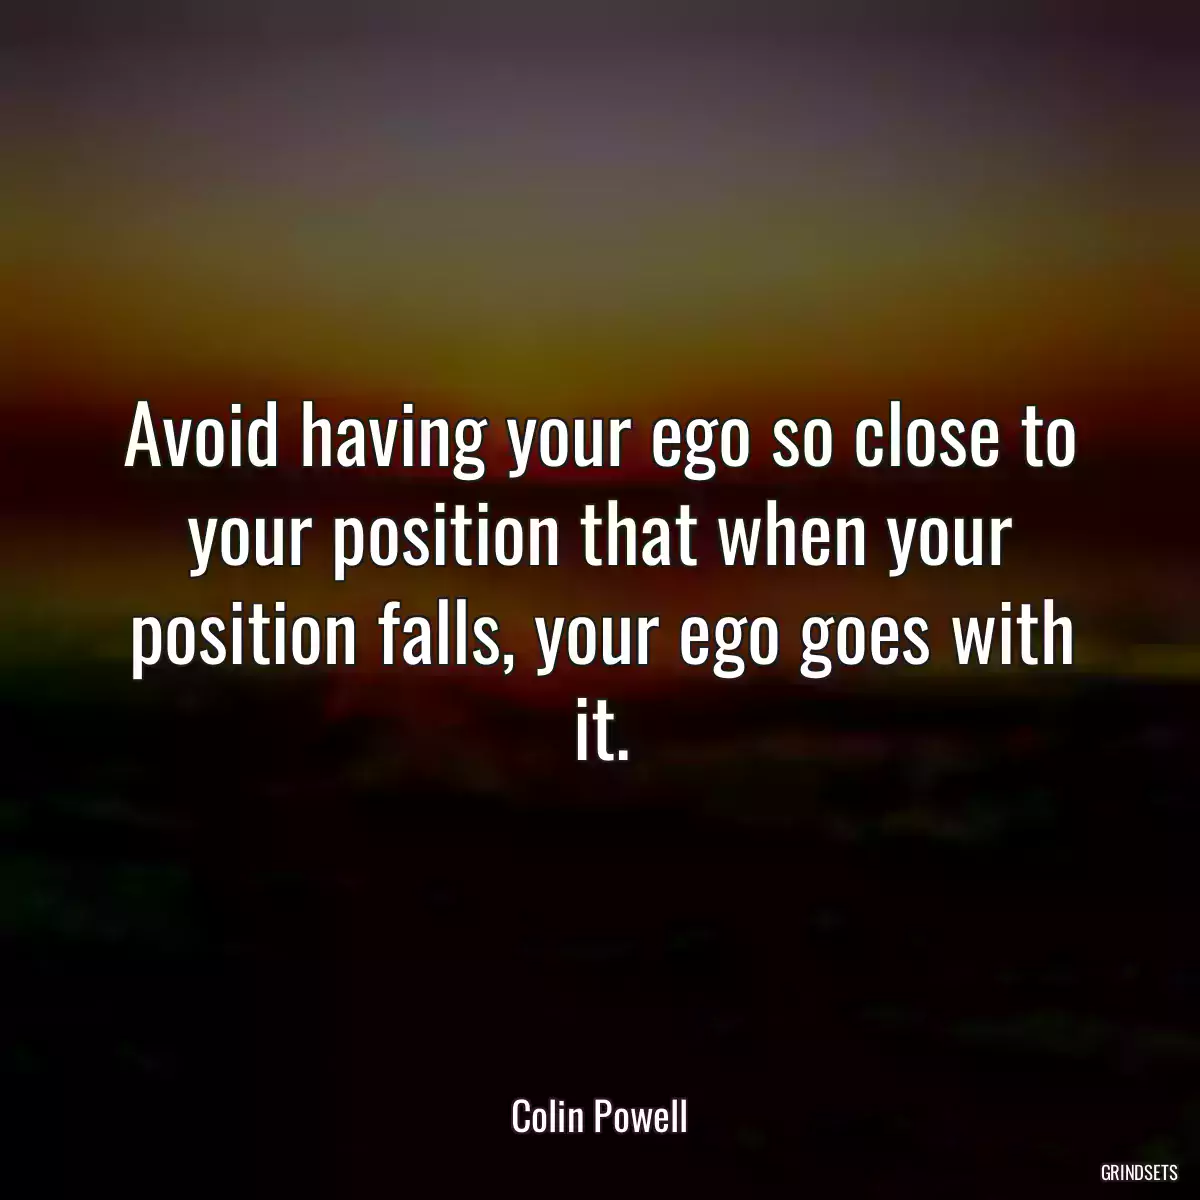 Avoid having your ego so close to your position that when your position falls, your ego goes with it.